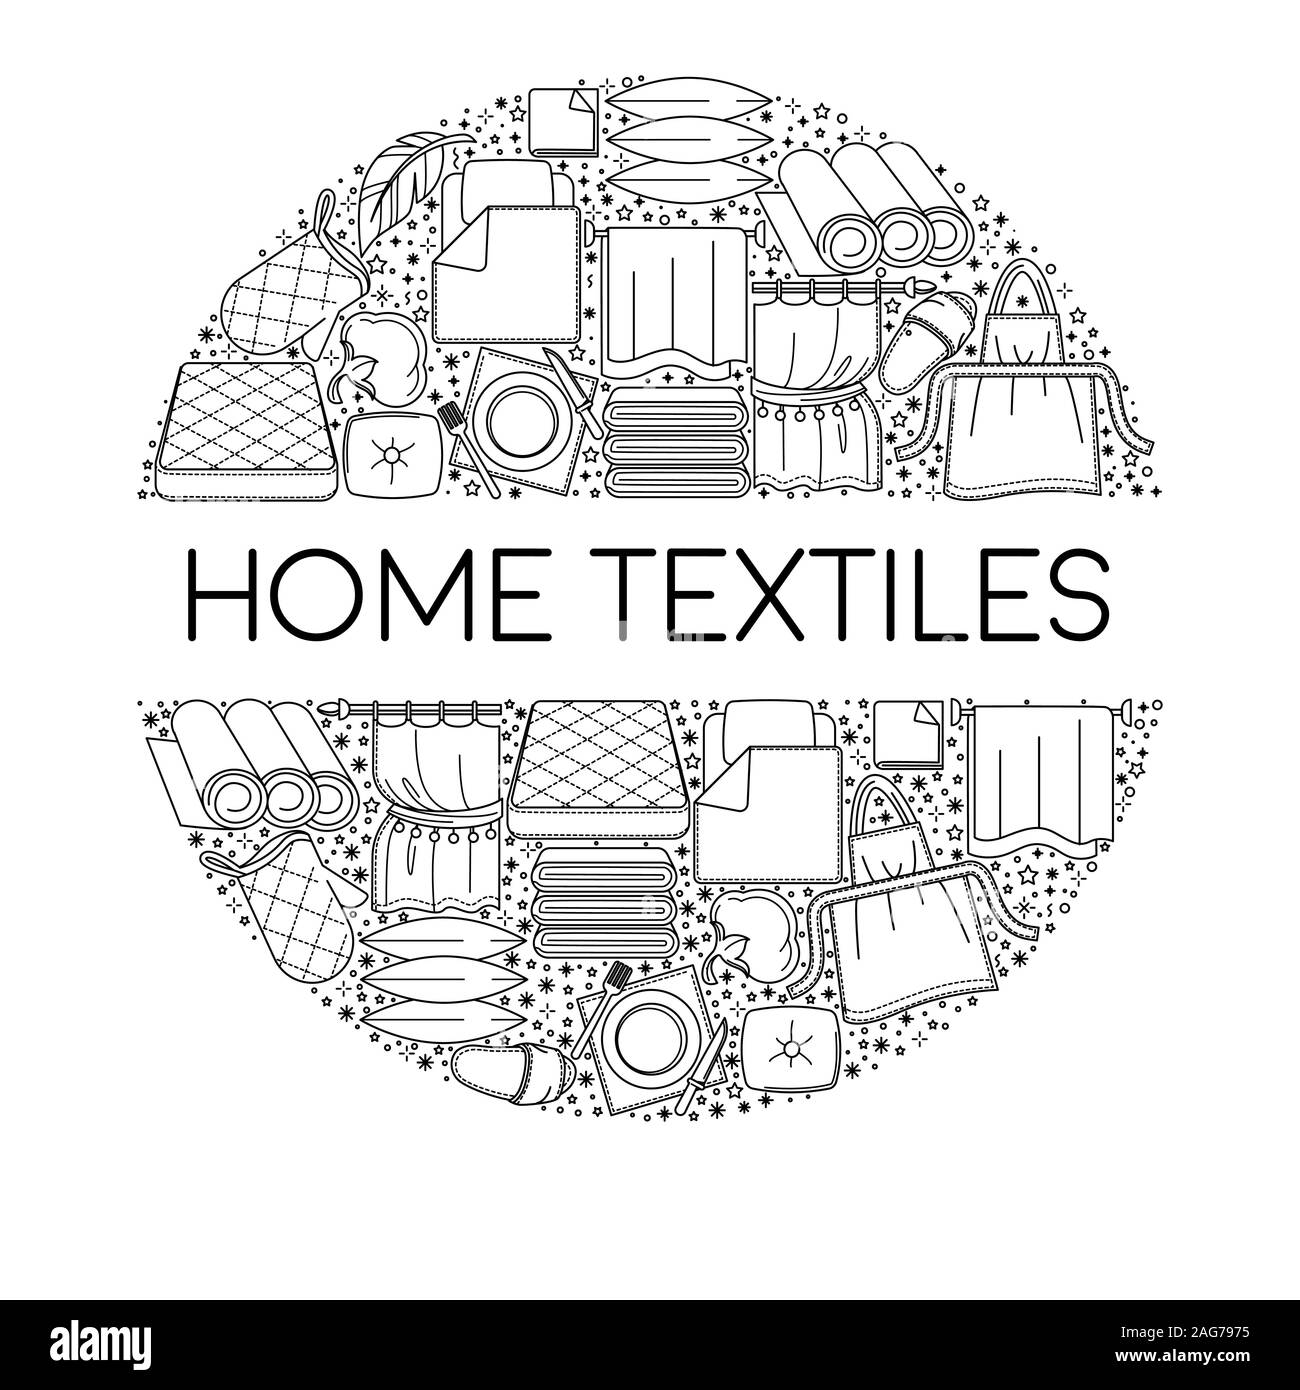 Home textiles items icons collection set in circle with text Stock Vector